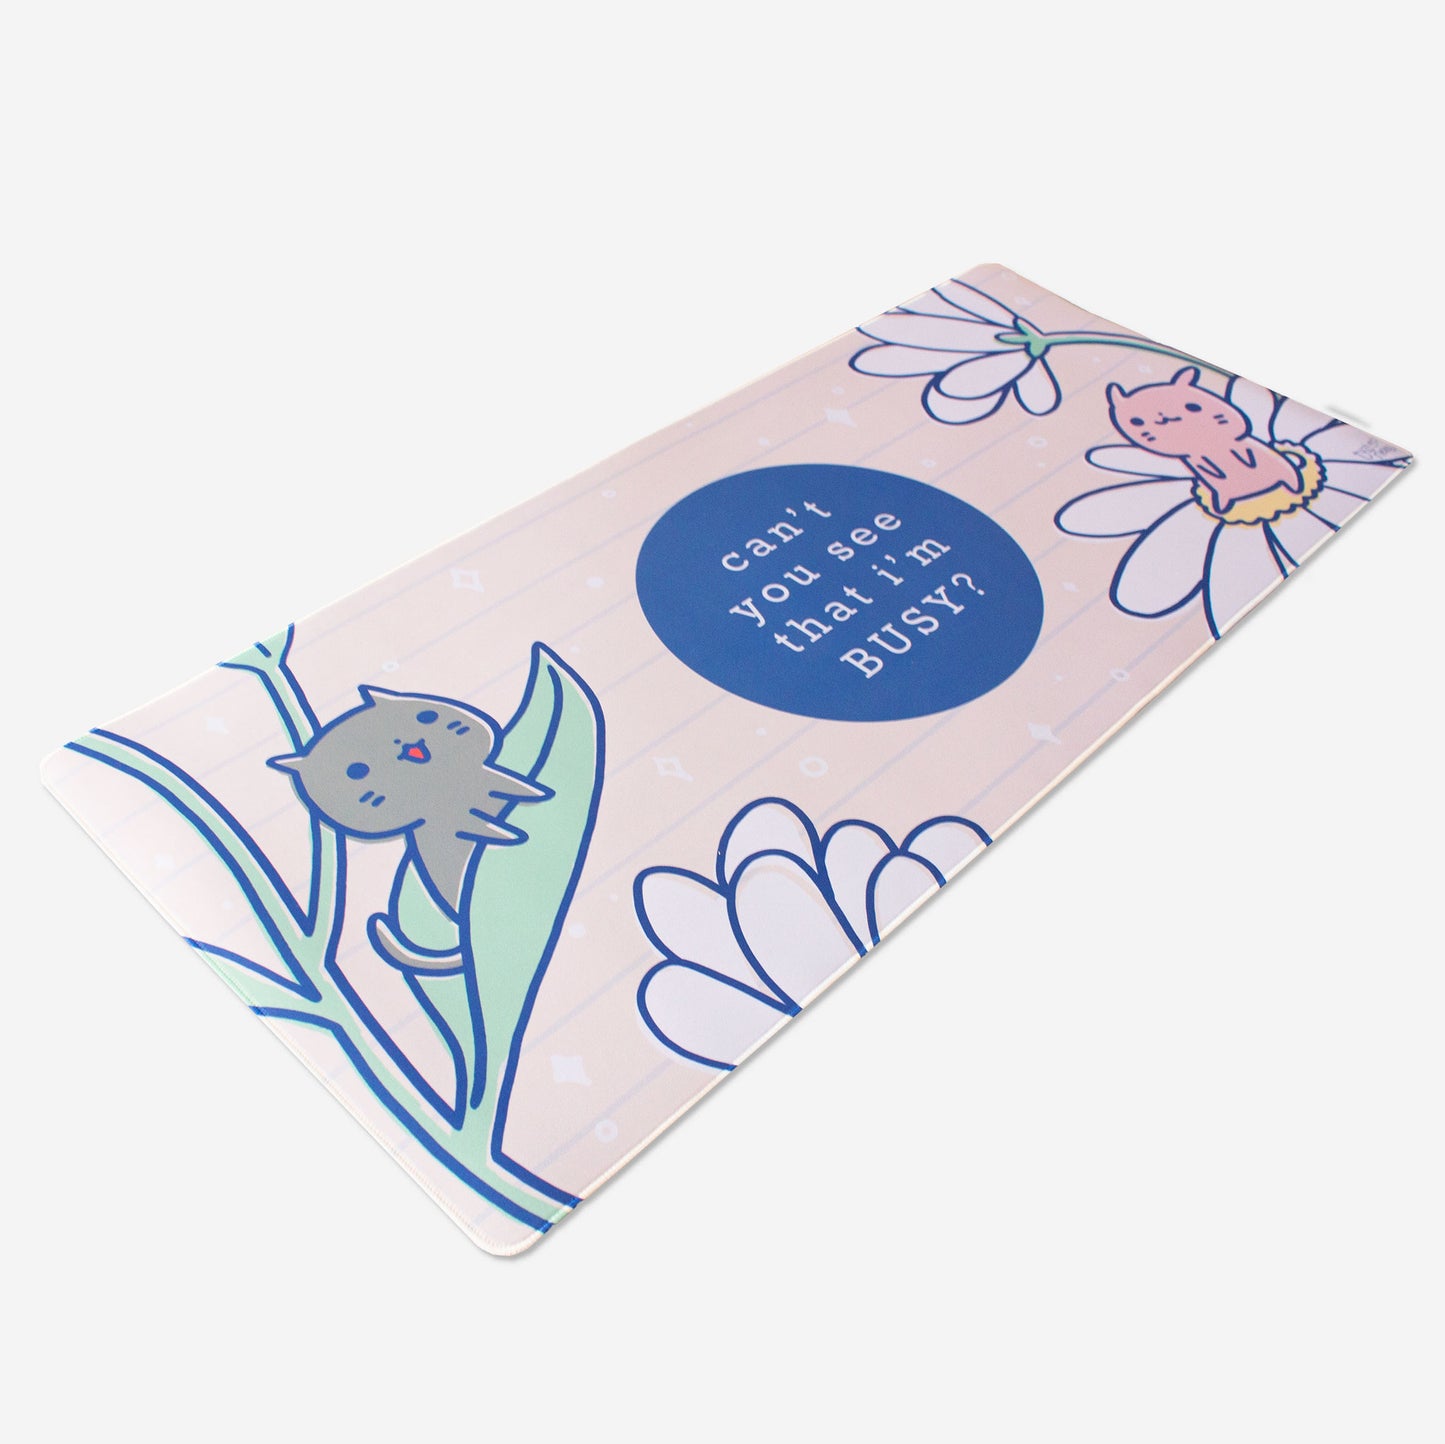 Tuzi And Neko "Can't You See That I'm Busy" Floral Desk Mat